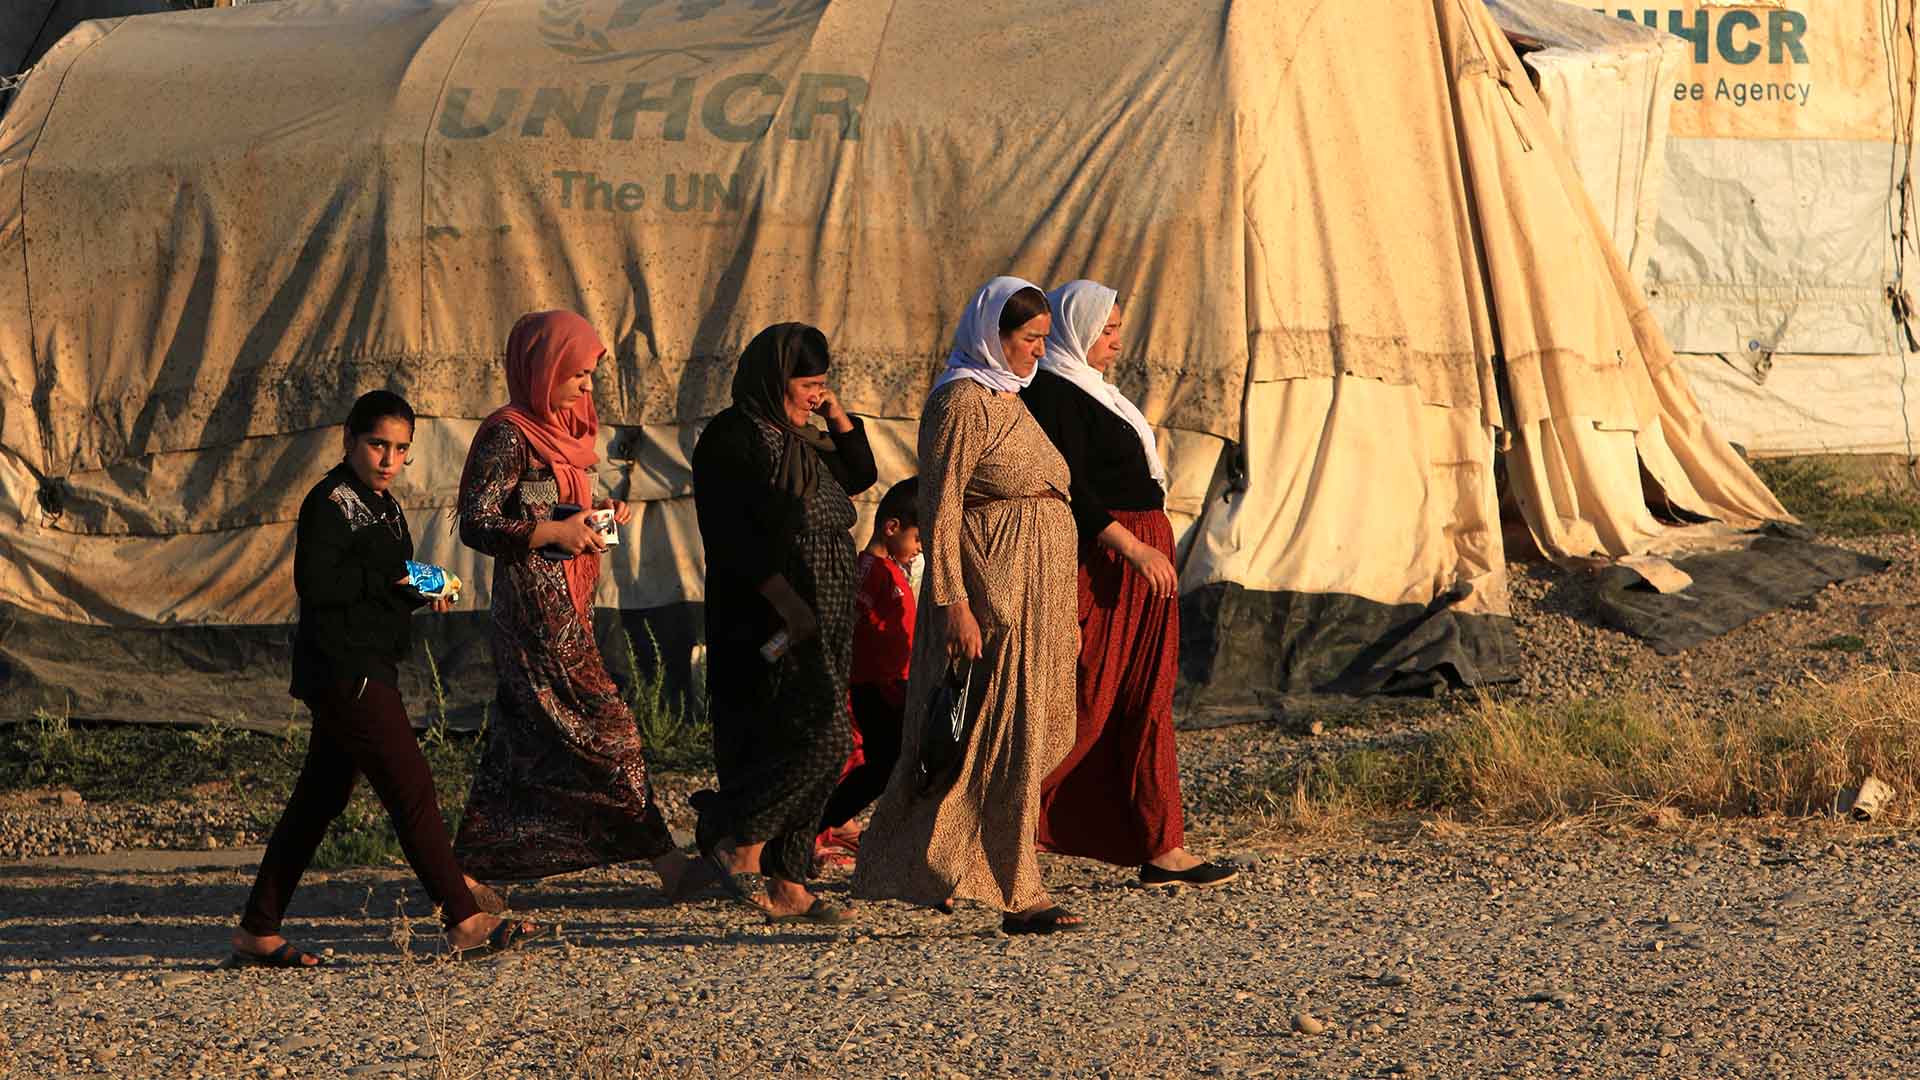 Five women and two children are pictures walking through Khanke Camp. Behind them we see tents all labeled with the UNHCR logo.